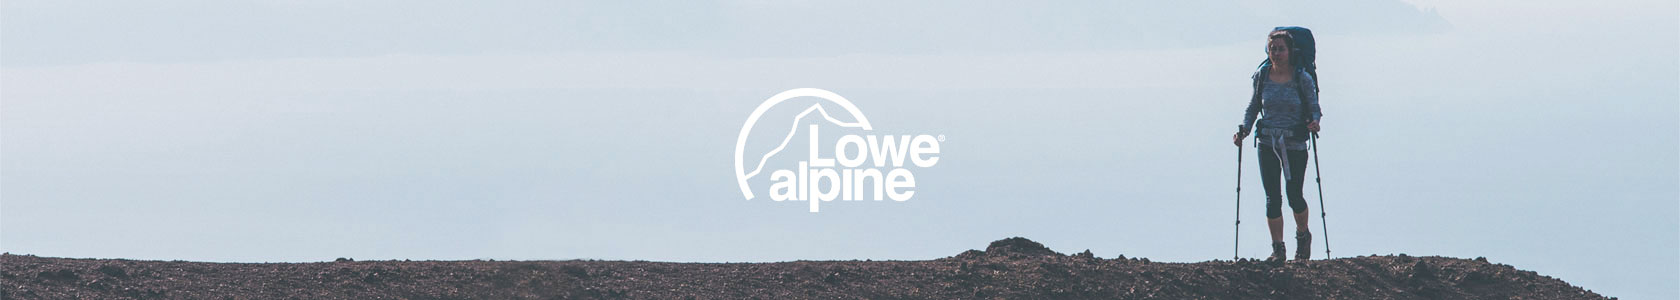 A woman stood at the top of a hill, wearing a Lowe Alpine backpack and holding walking sticks